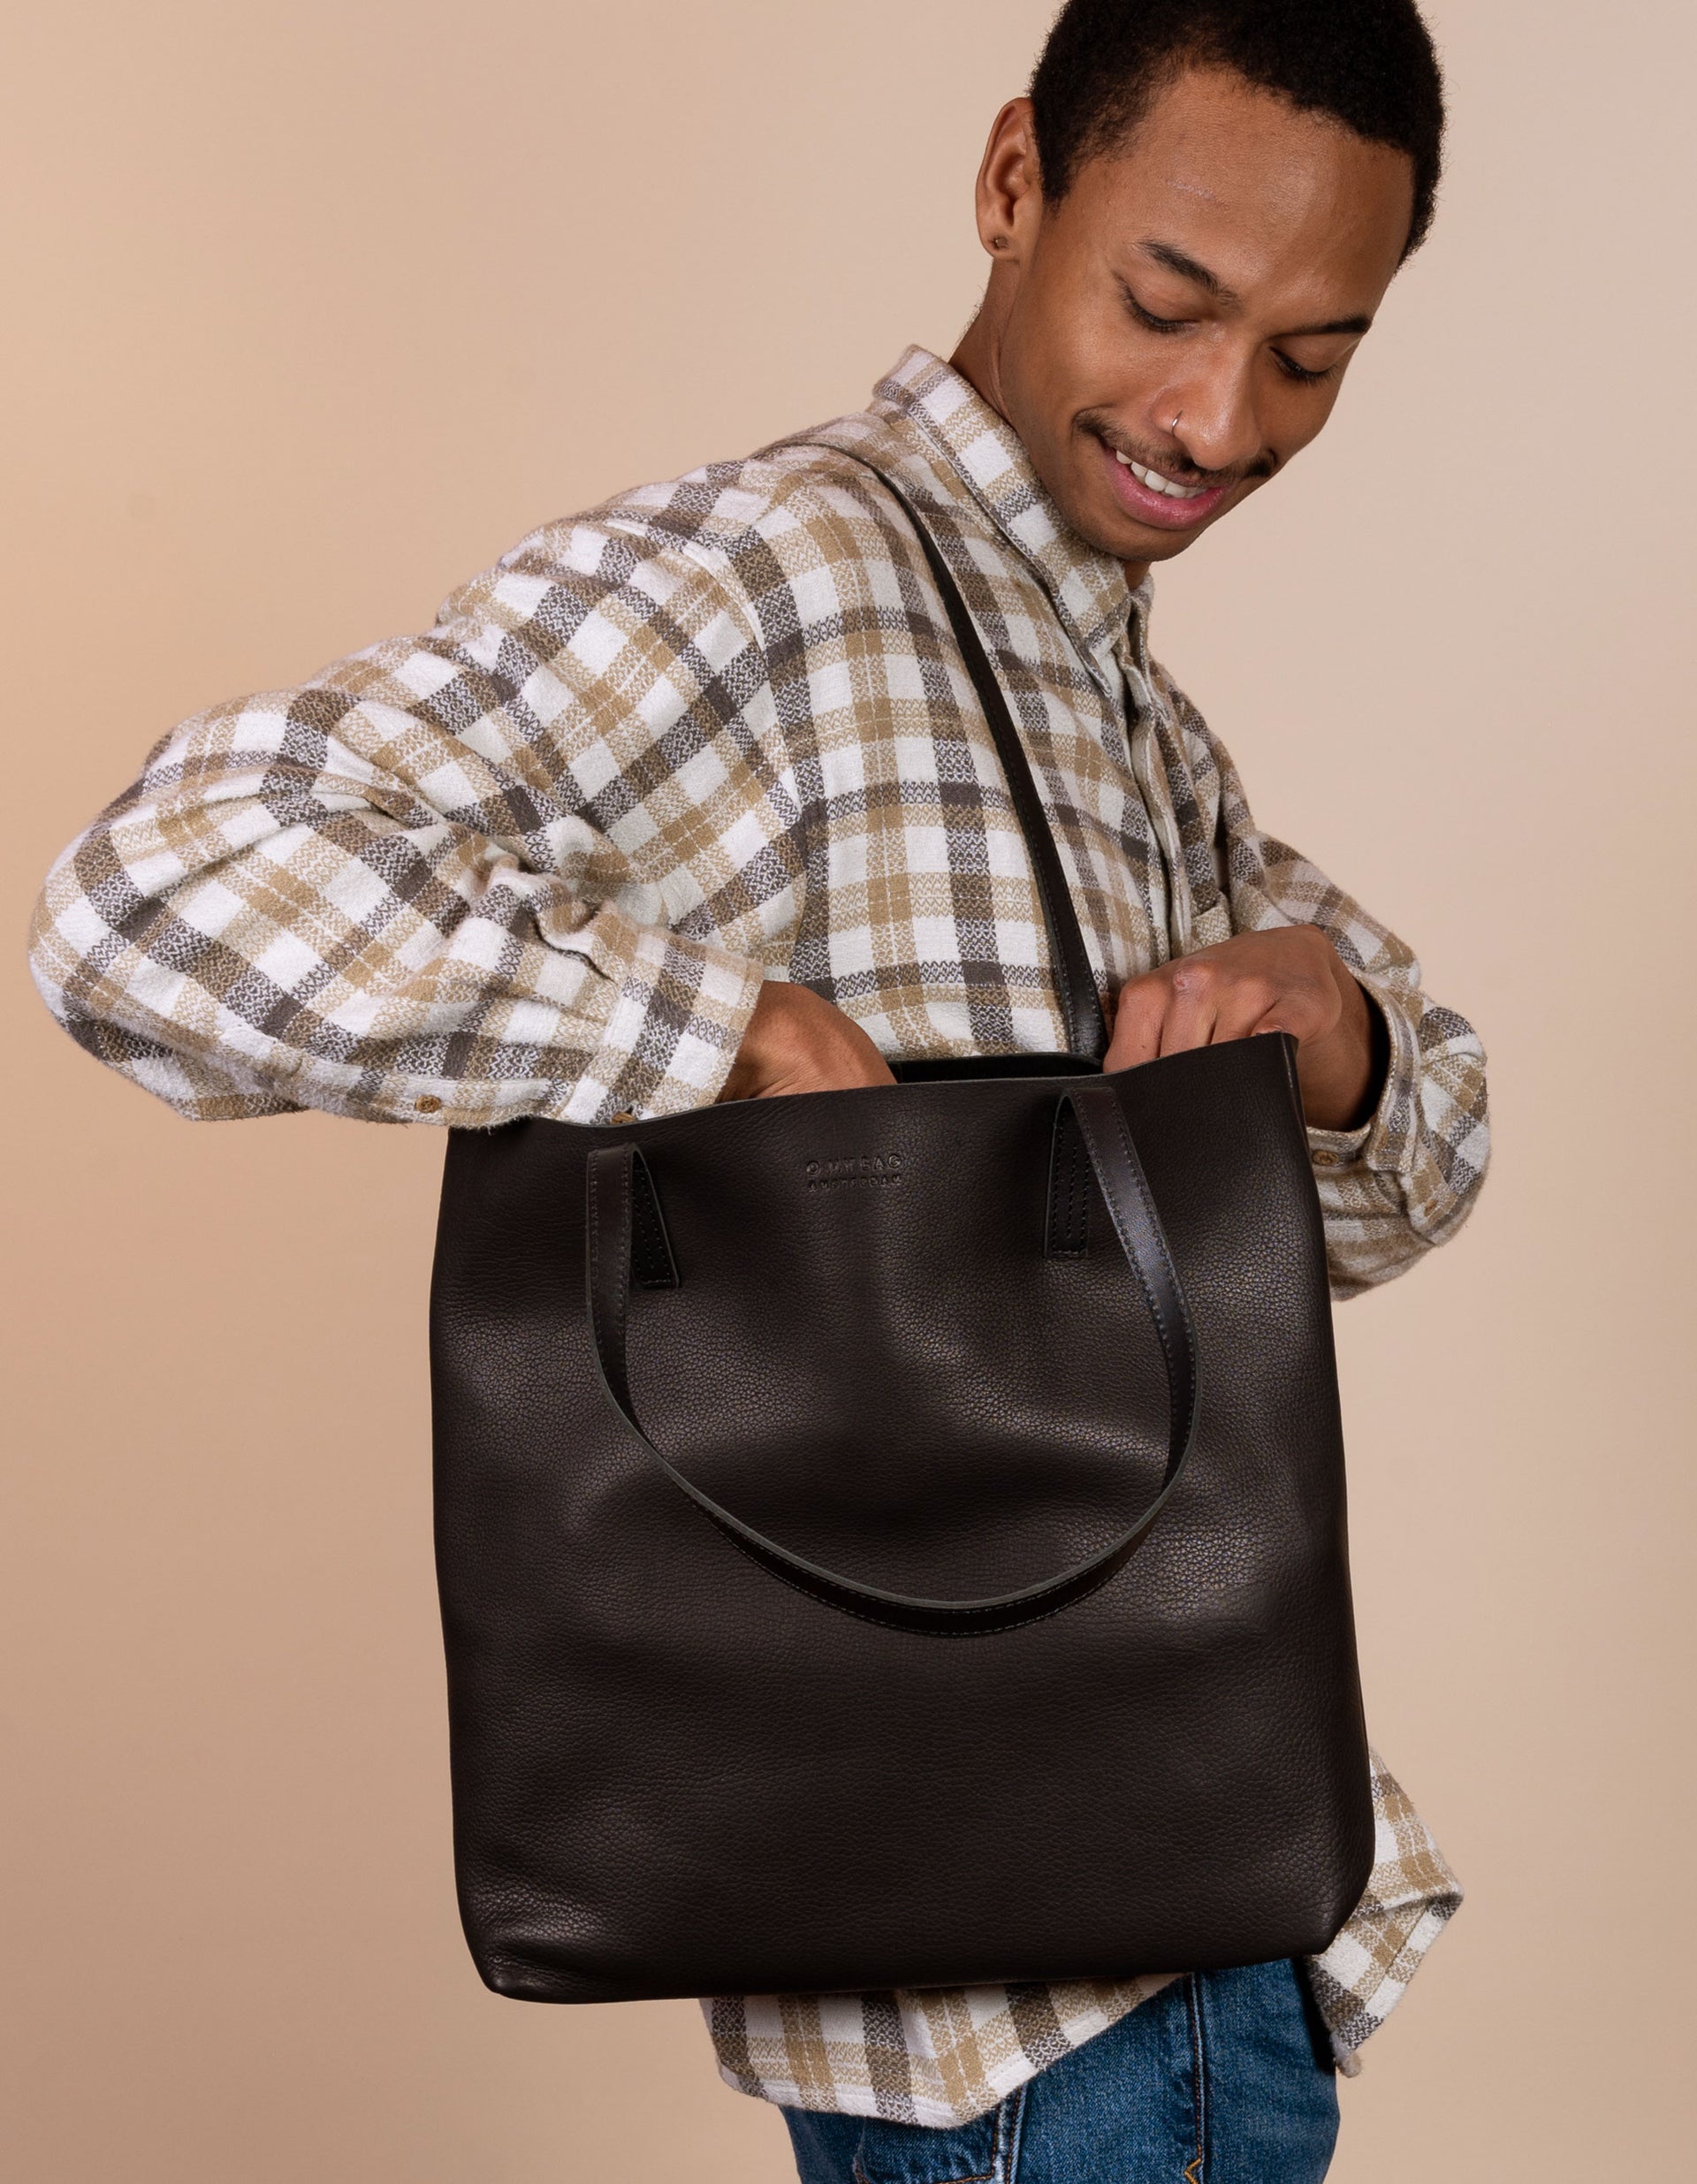 Georgia tote in black soft grain leather - male model product image - side angle